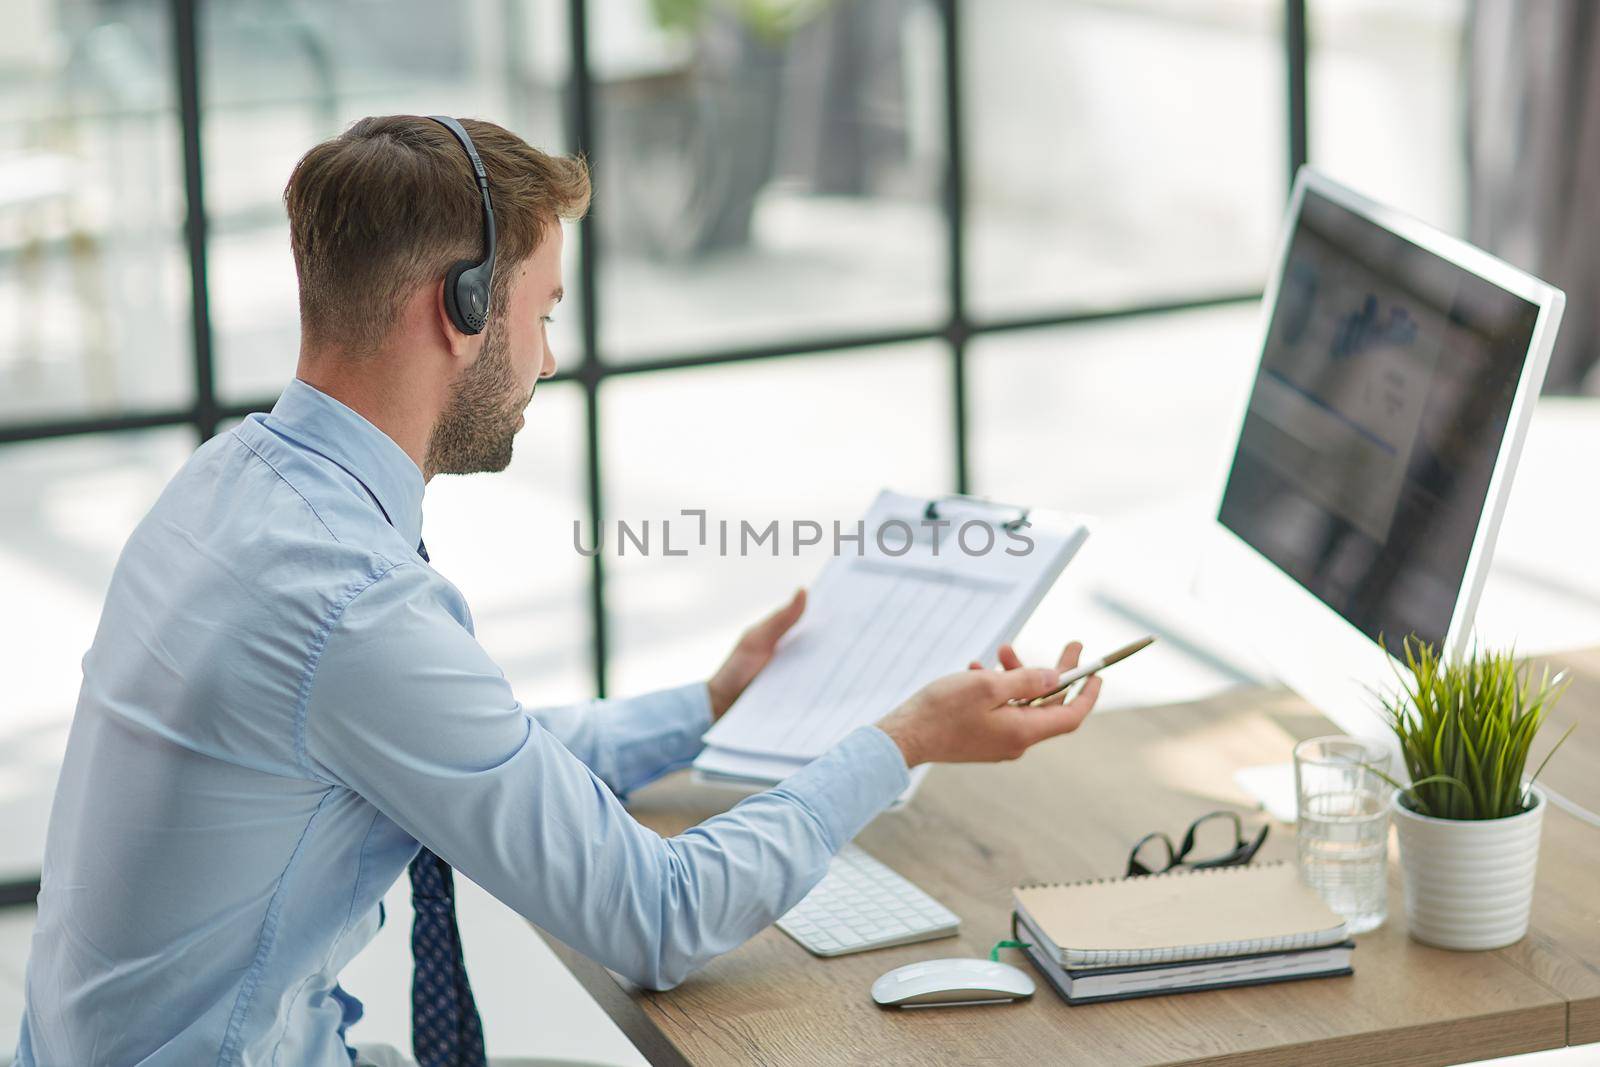 Man with headphones and laptop working in office by Prosto